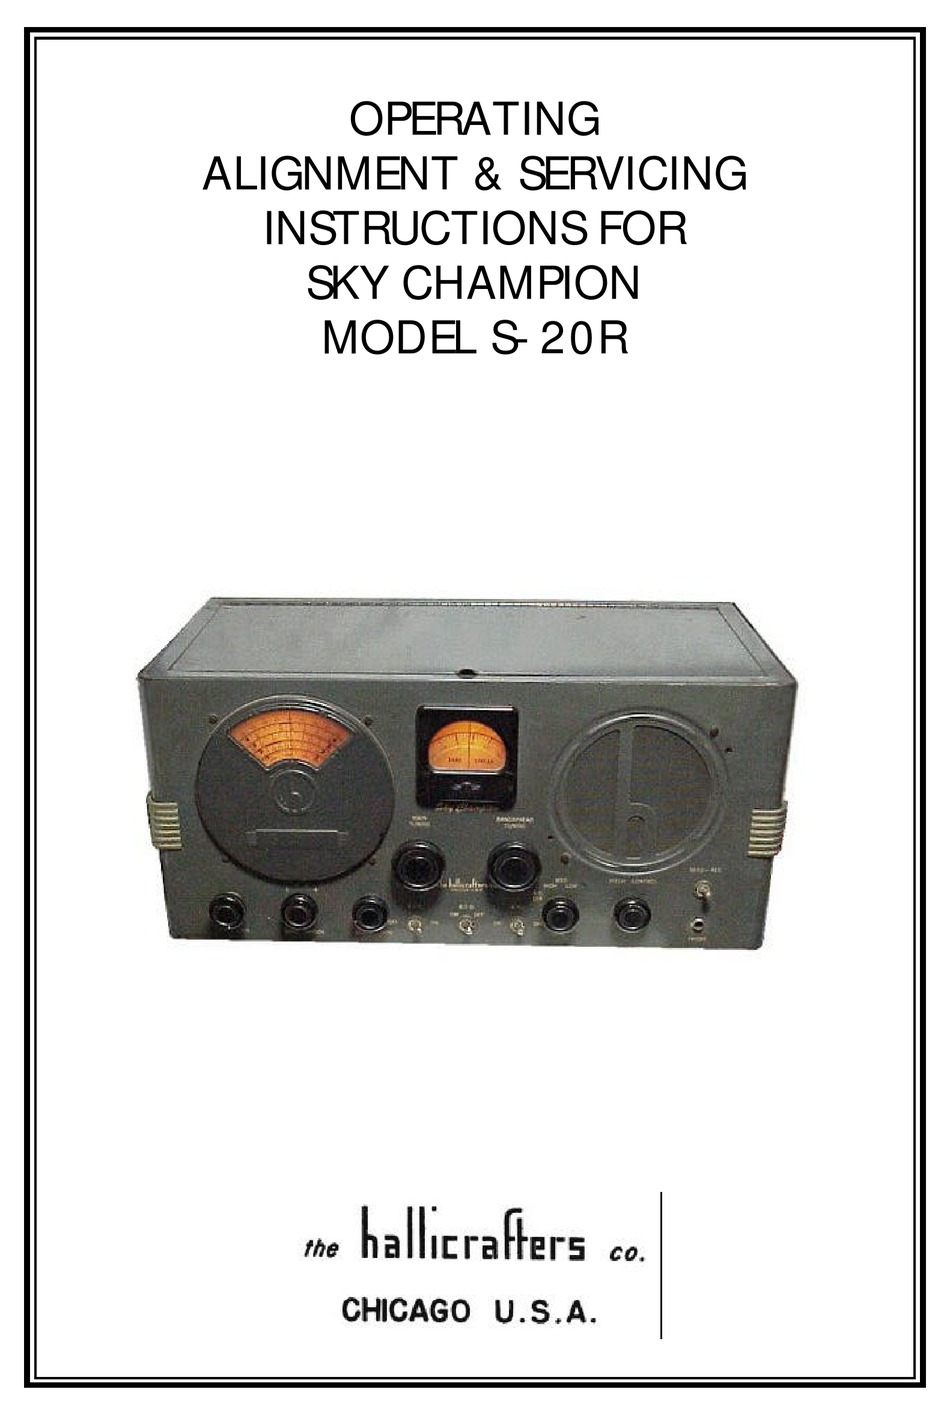 HALLICRAFTERS SKY CHAMPION S-20R OPERATING/SERVICE INSTRUCTIONS Pdf